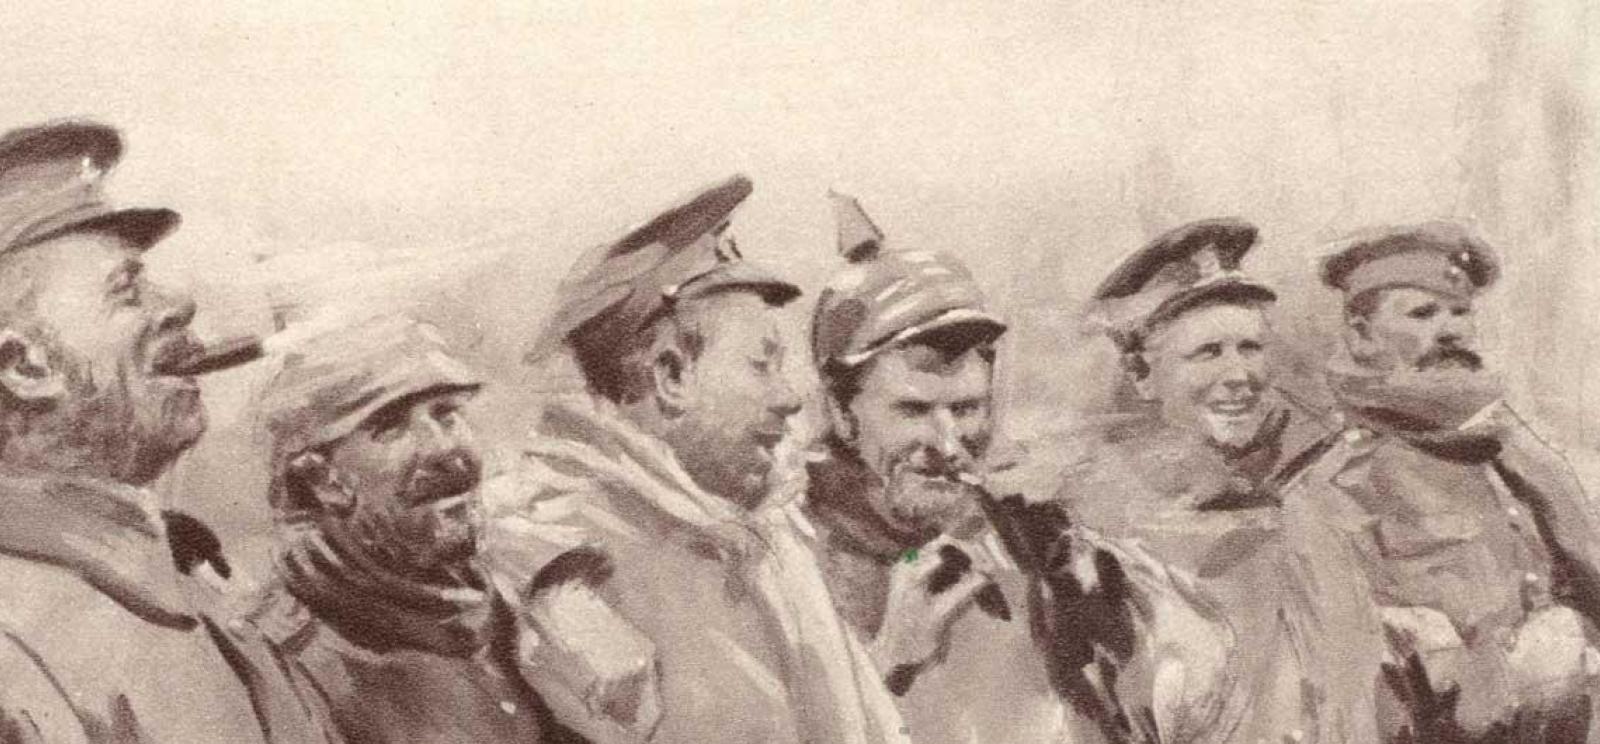 Loose, sketchy painting of six soldiers dressed in winter clothing and military uniforms from different countries. They are smiling and laughing, some of them smoking cigarettes or cigars.